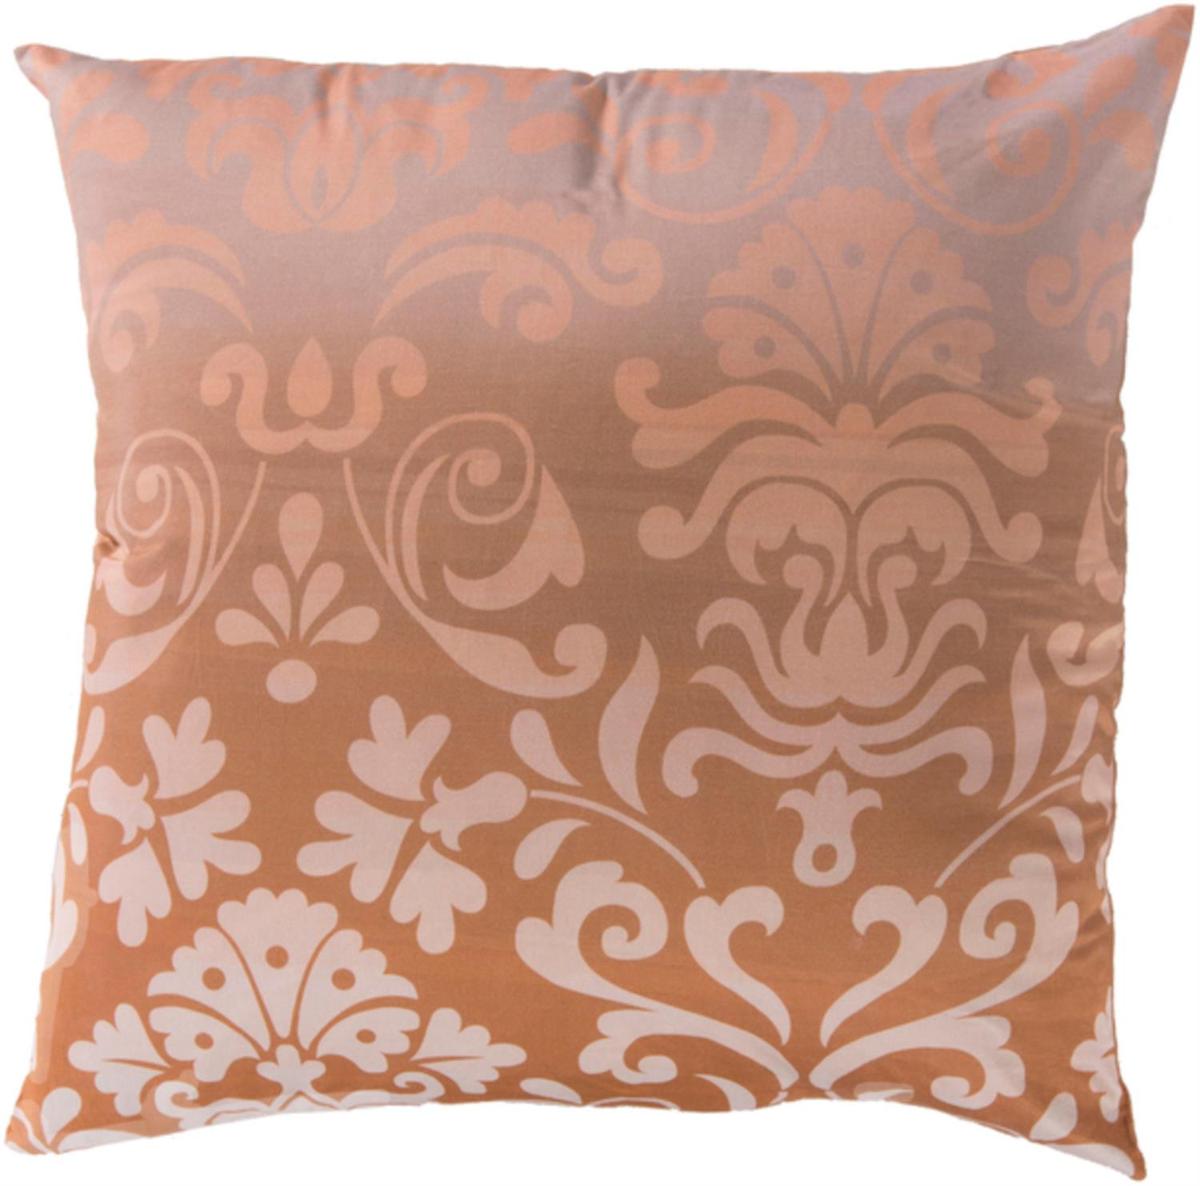 Surya Elizabeth 18" x 18" Pale Pink And Camel Pillow Cover SY009-1818